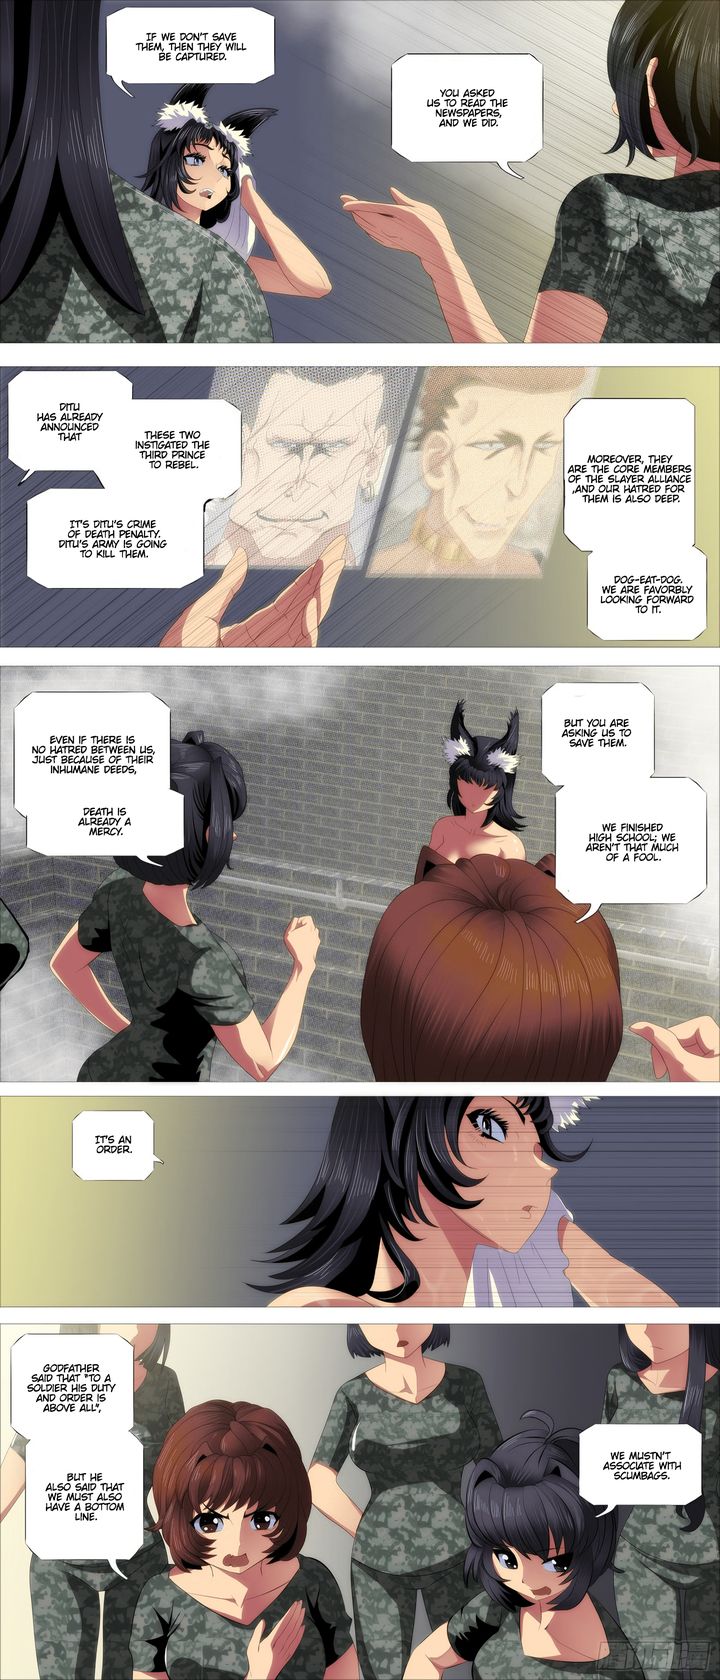 Iron Ladies Chapter 386 Page 1